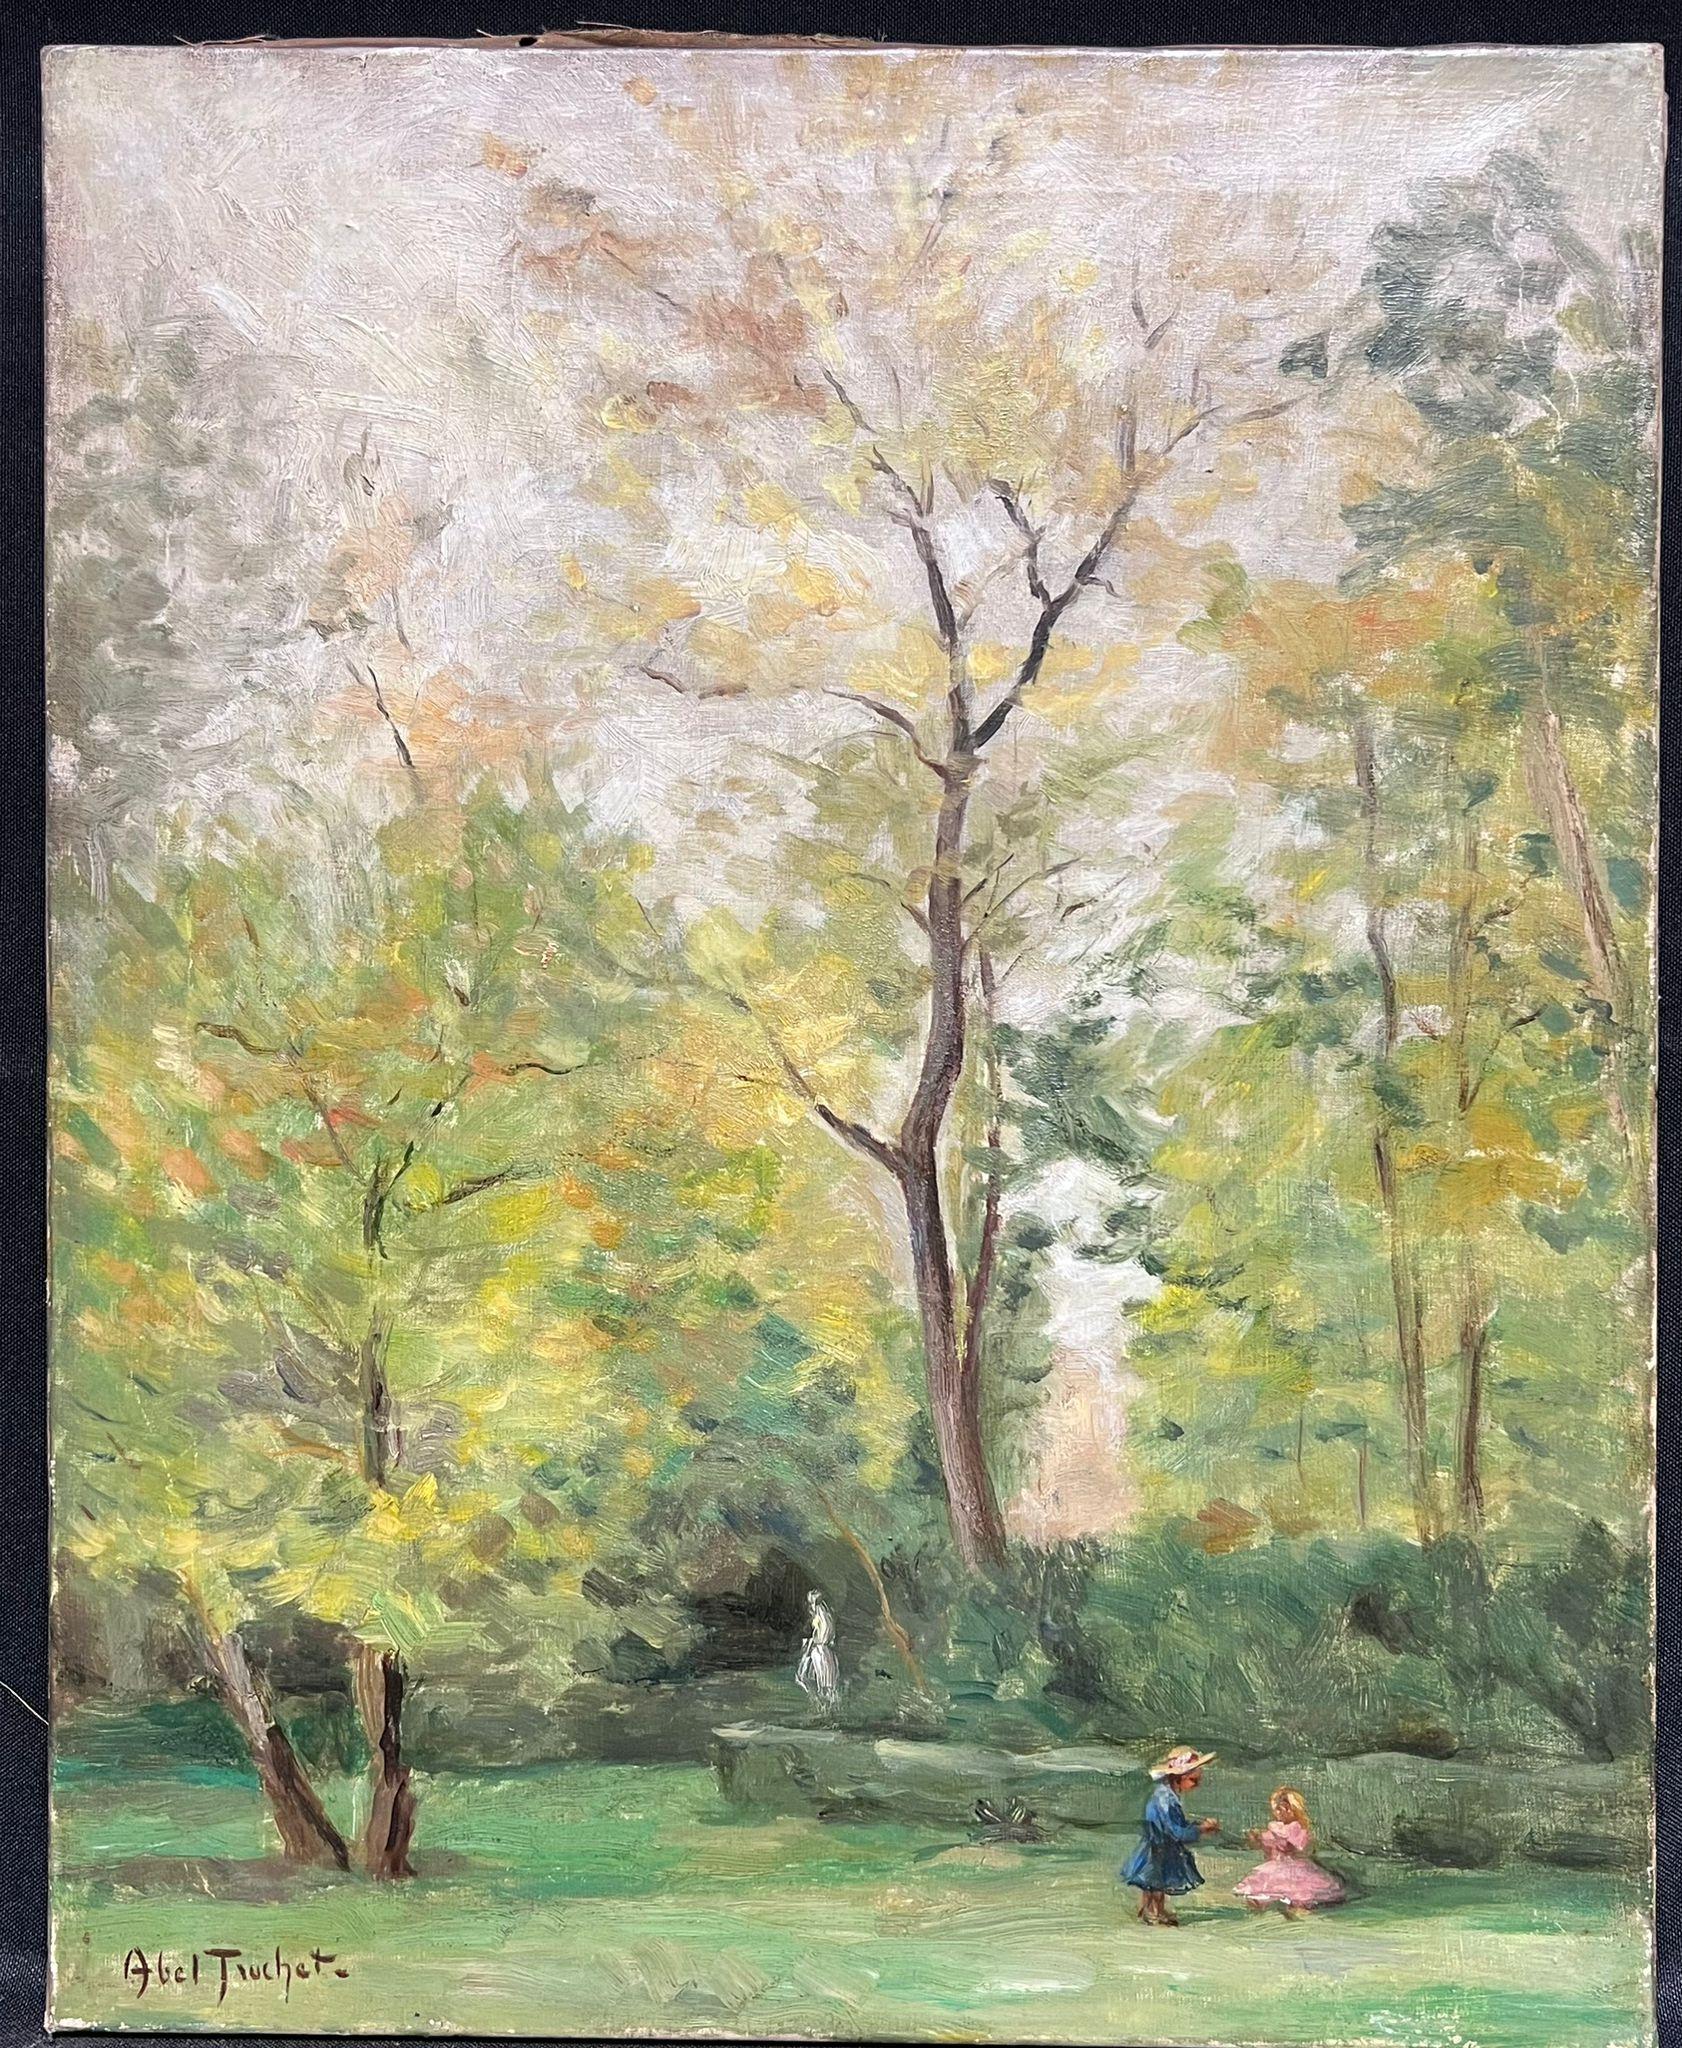 In the Park
by Louis Abel-Truchet (French 1857-1918) *see below
signed oil on canvas, unframed
canvas: 16 x 13 inches
provenance: private collection, France
condition: overall good and sound condition 

Born in Versailles in 1857, Louis Abel-Truchet